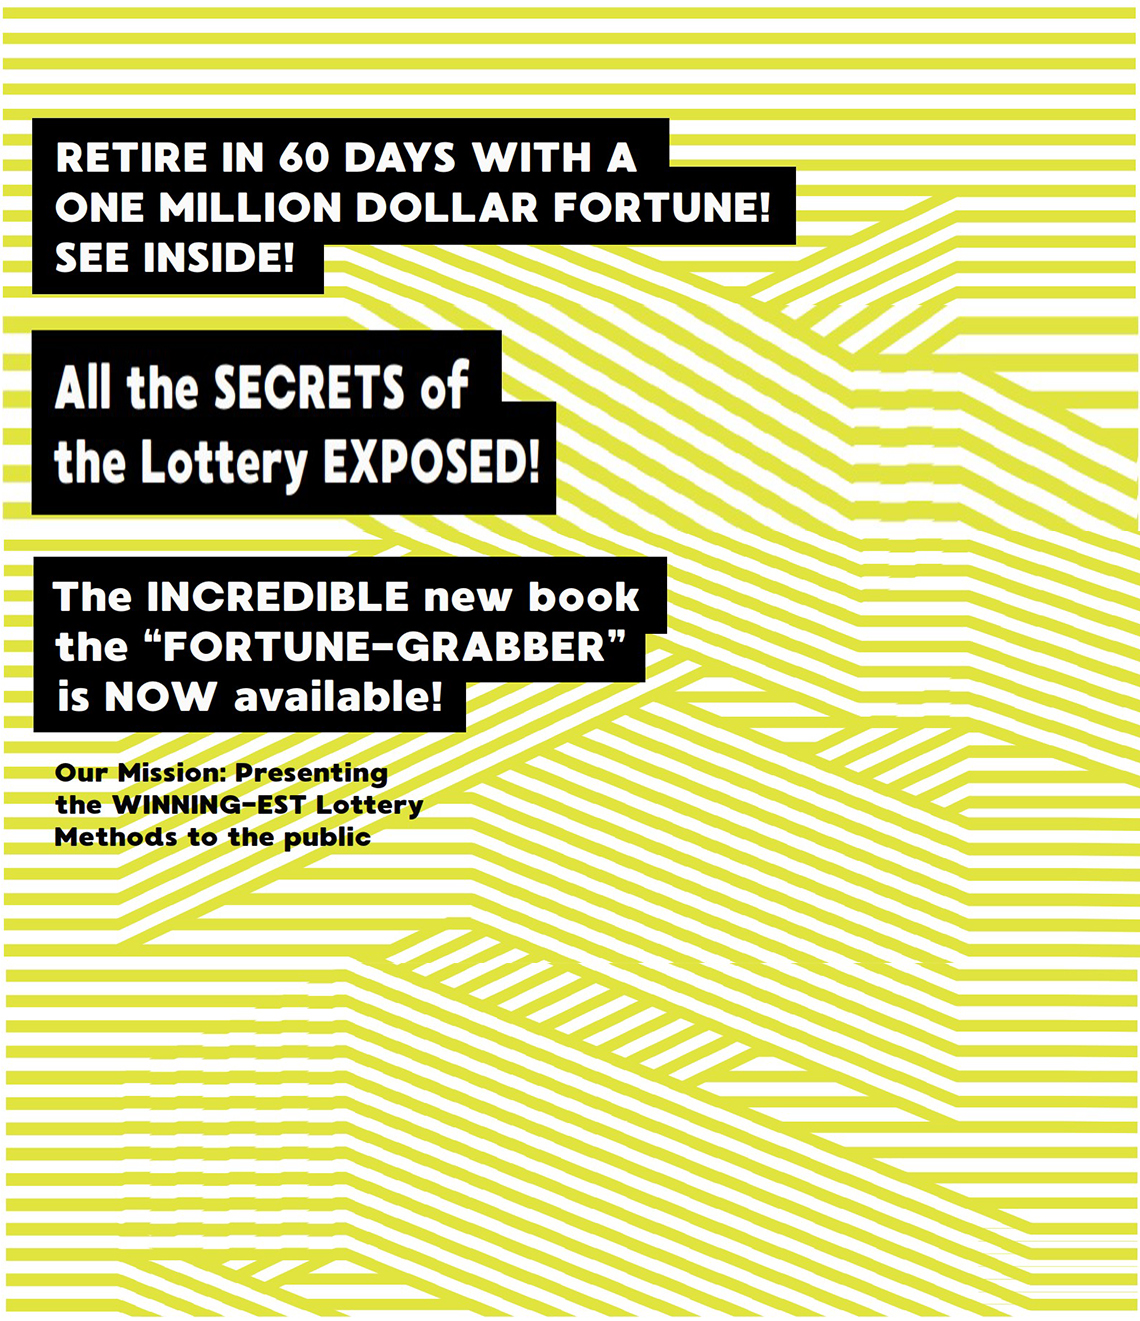 RETIRE IN 60 DAYS WITH A
					ONE MILLION DOLLAR FORTUNE!
					SEE INSIDE!